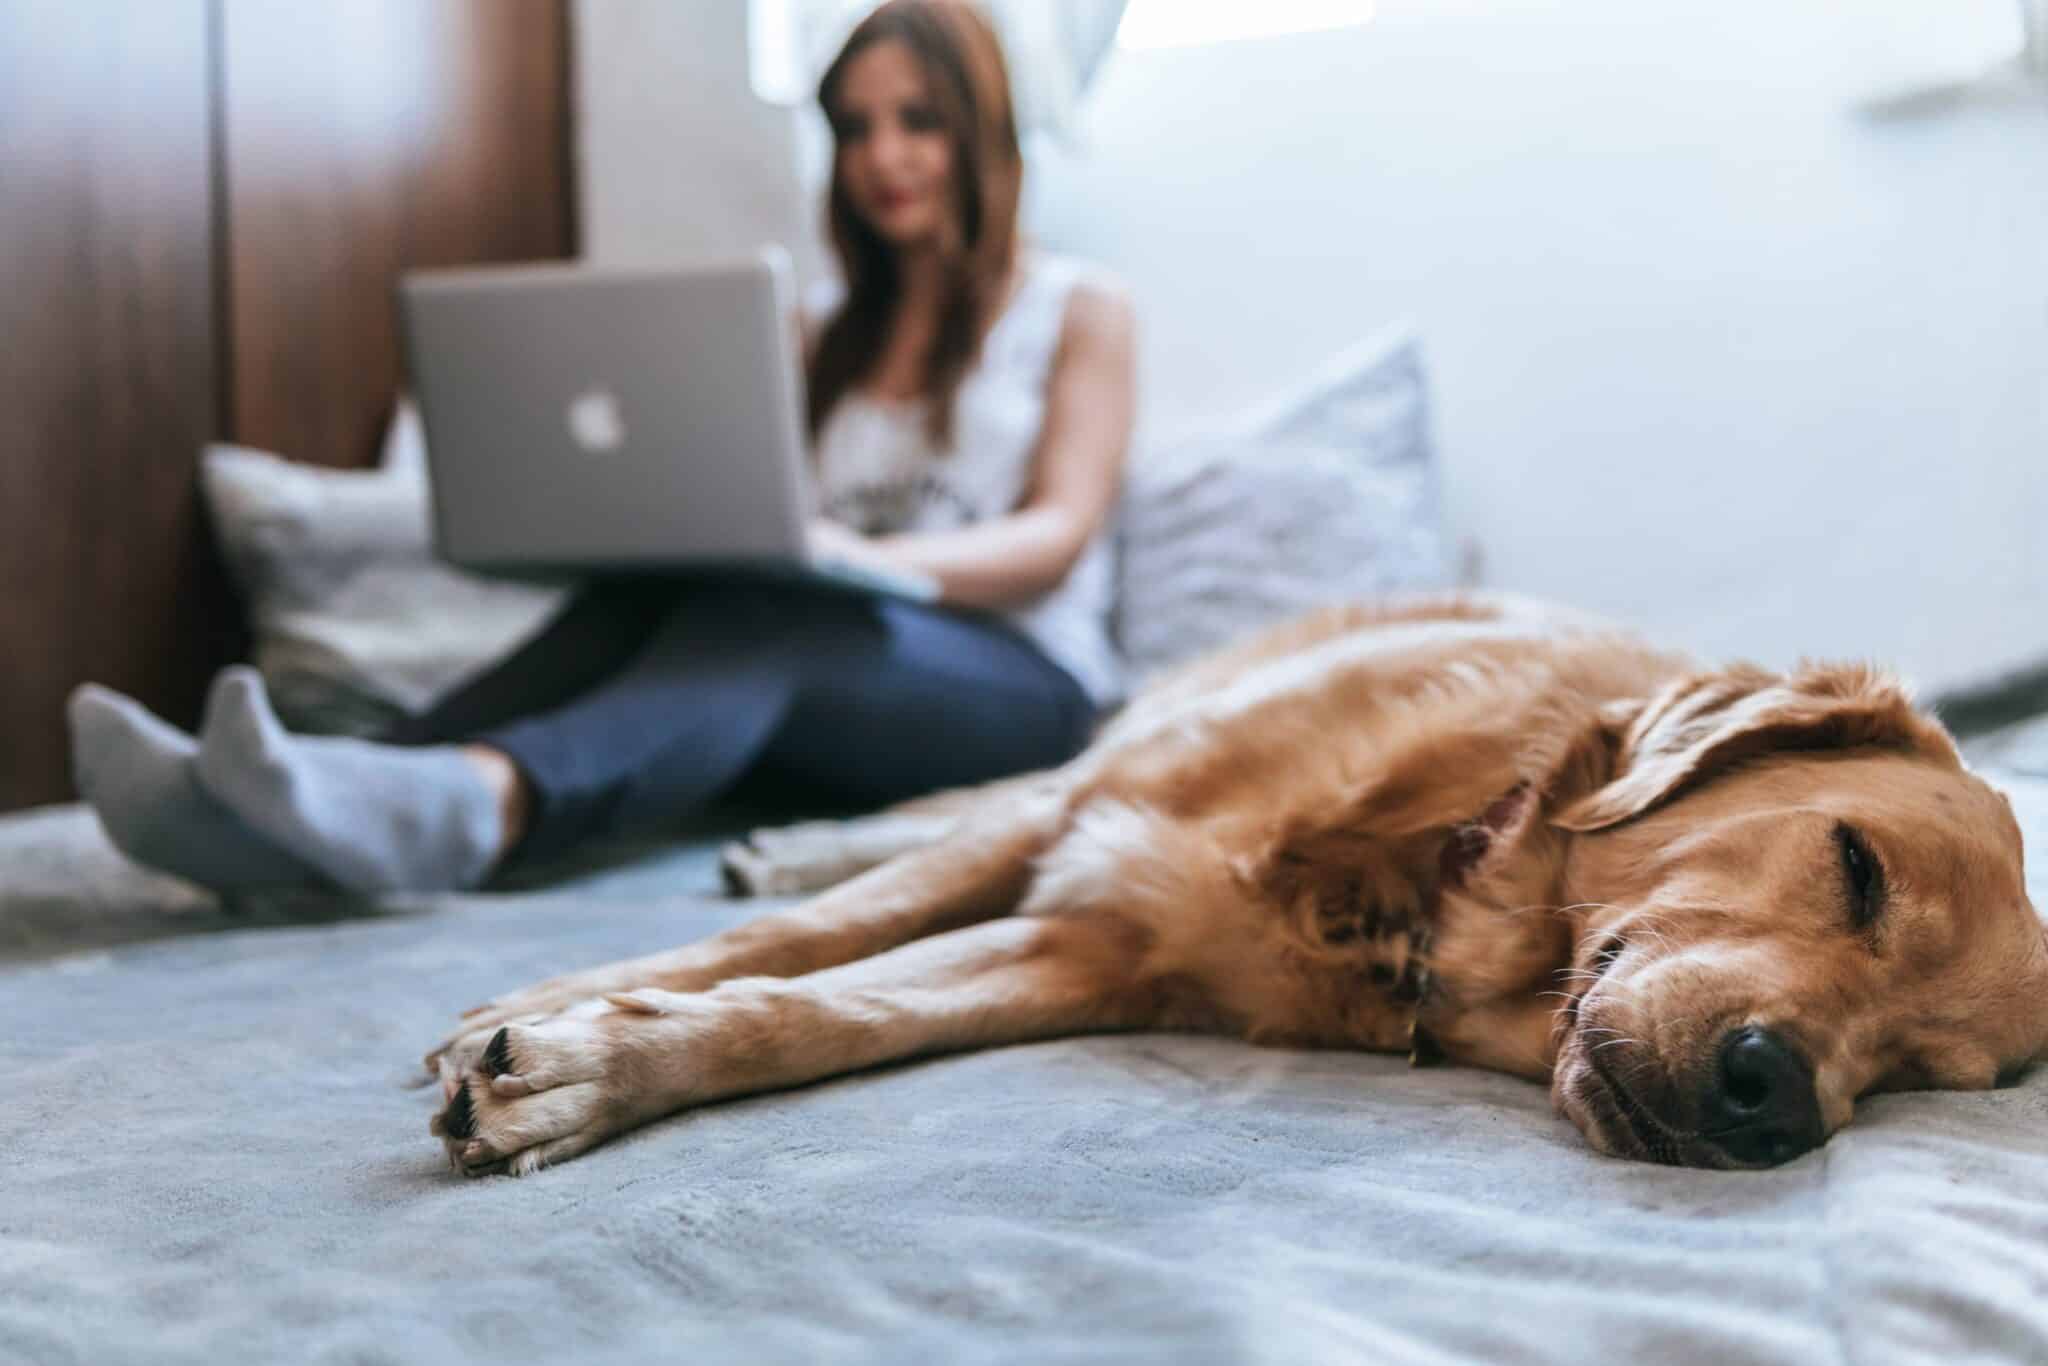 woman sitting on a bed working on her laptop resting on her lap, and a sleeping dog beside her